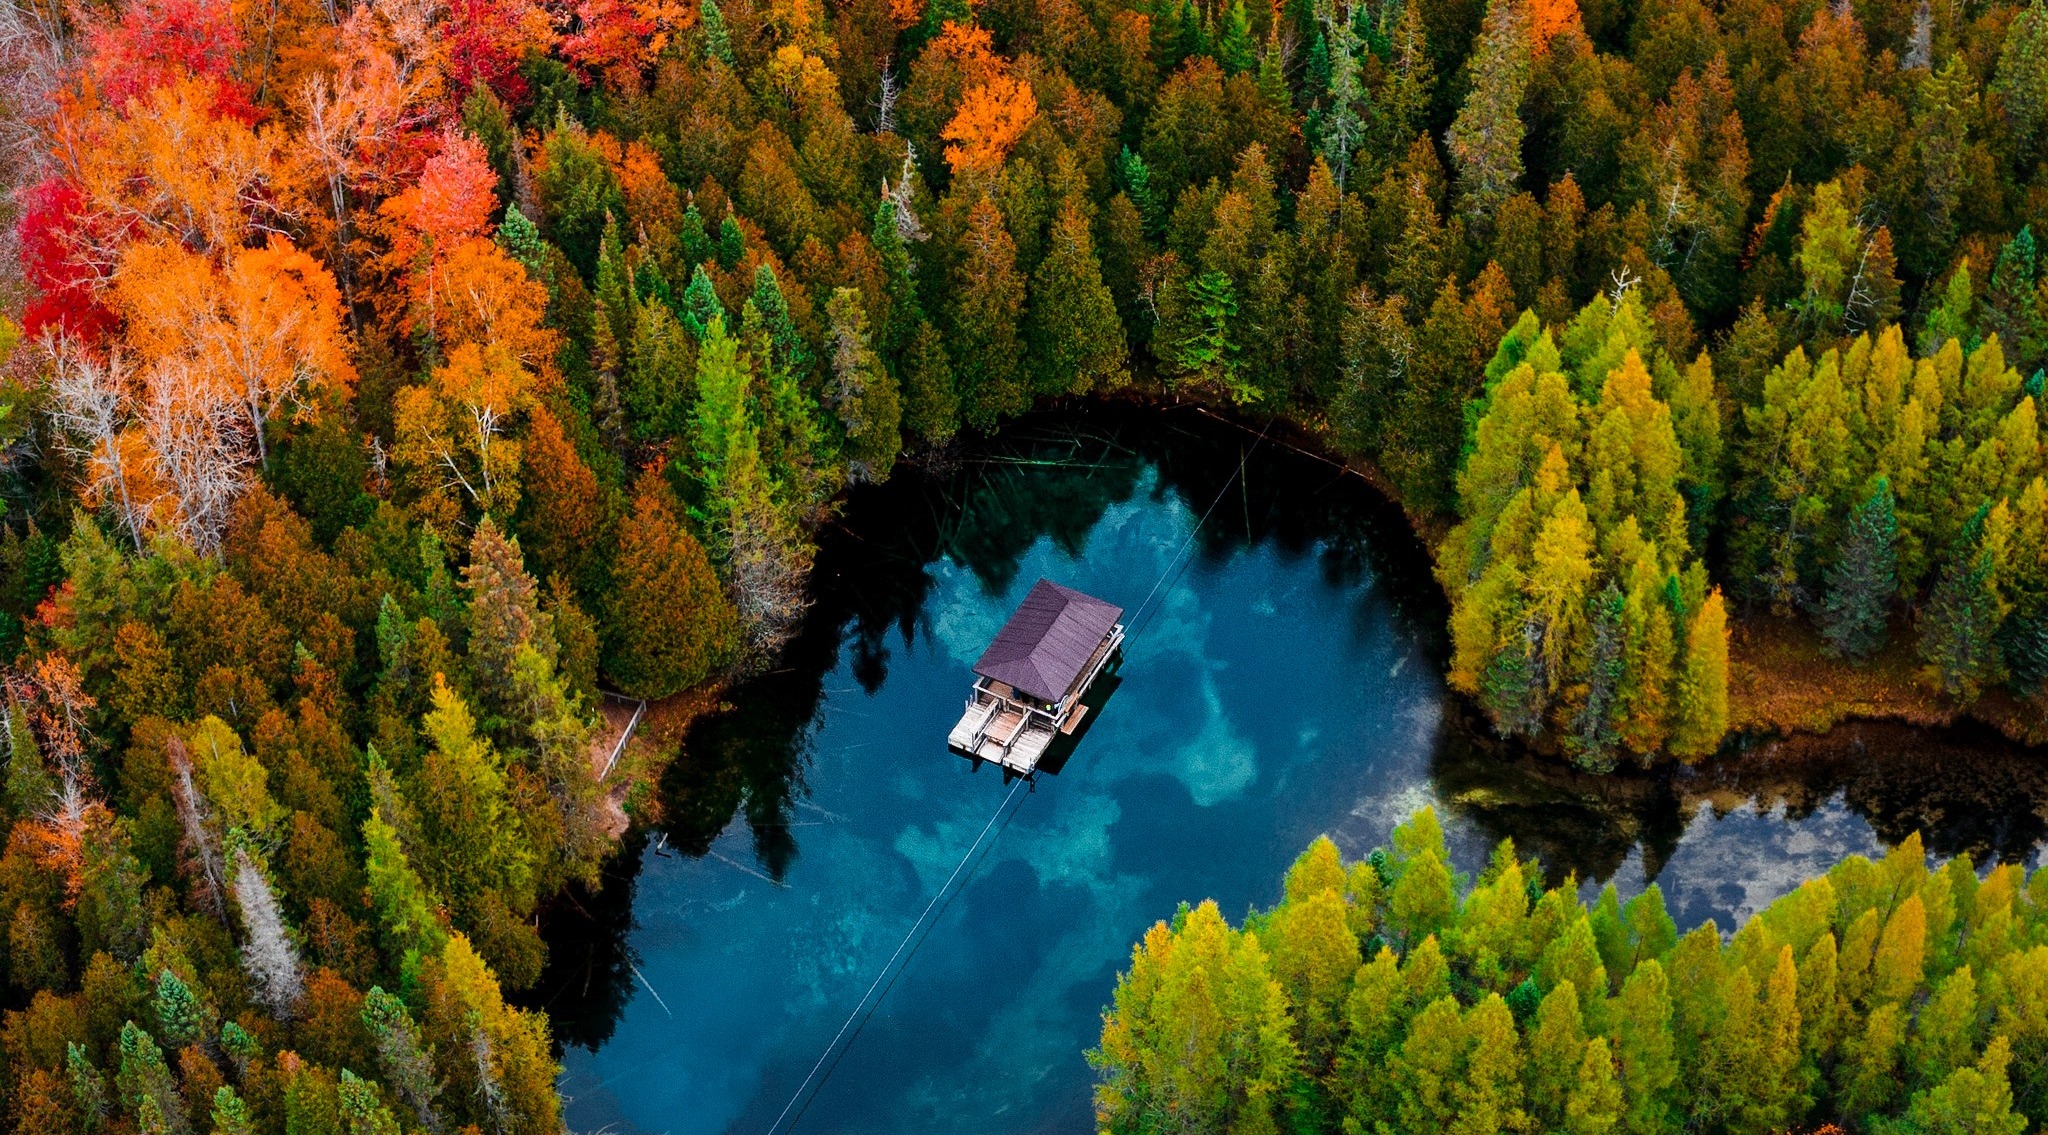 Drone/Aerial image of Kitch-iti-kipi, a freshwater spring in the Upper Peninsula of Michigan.